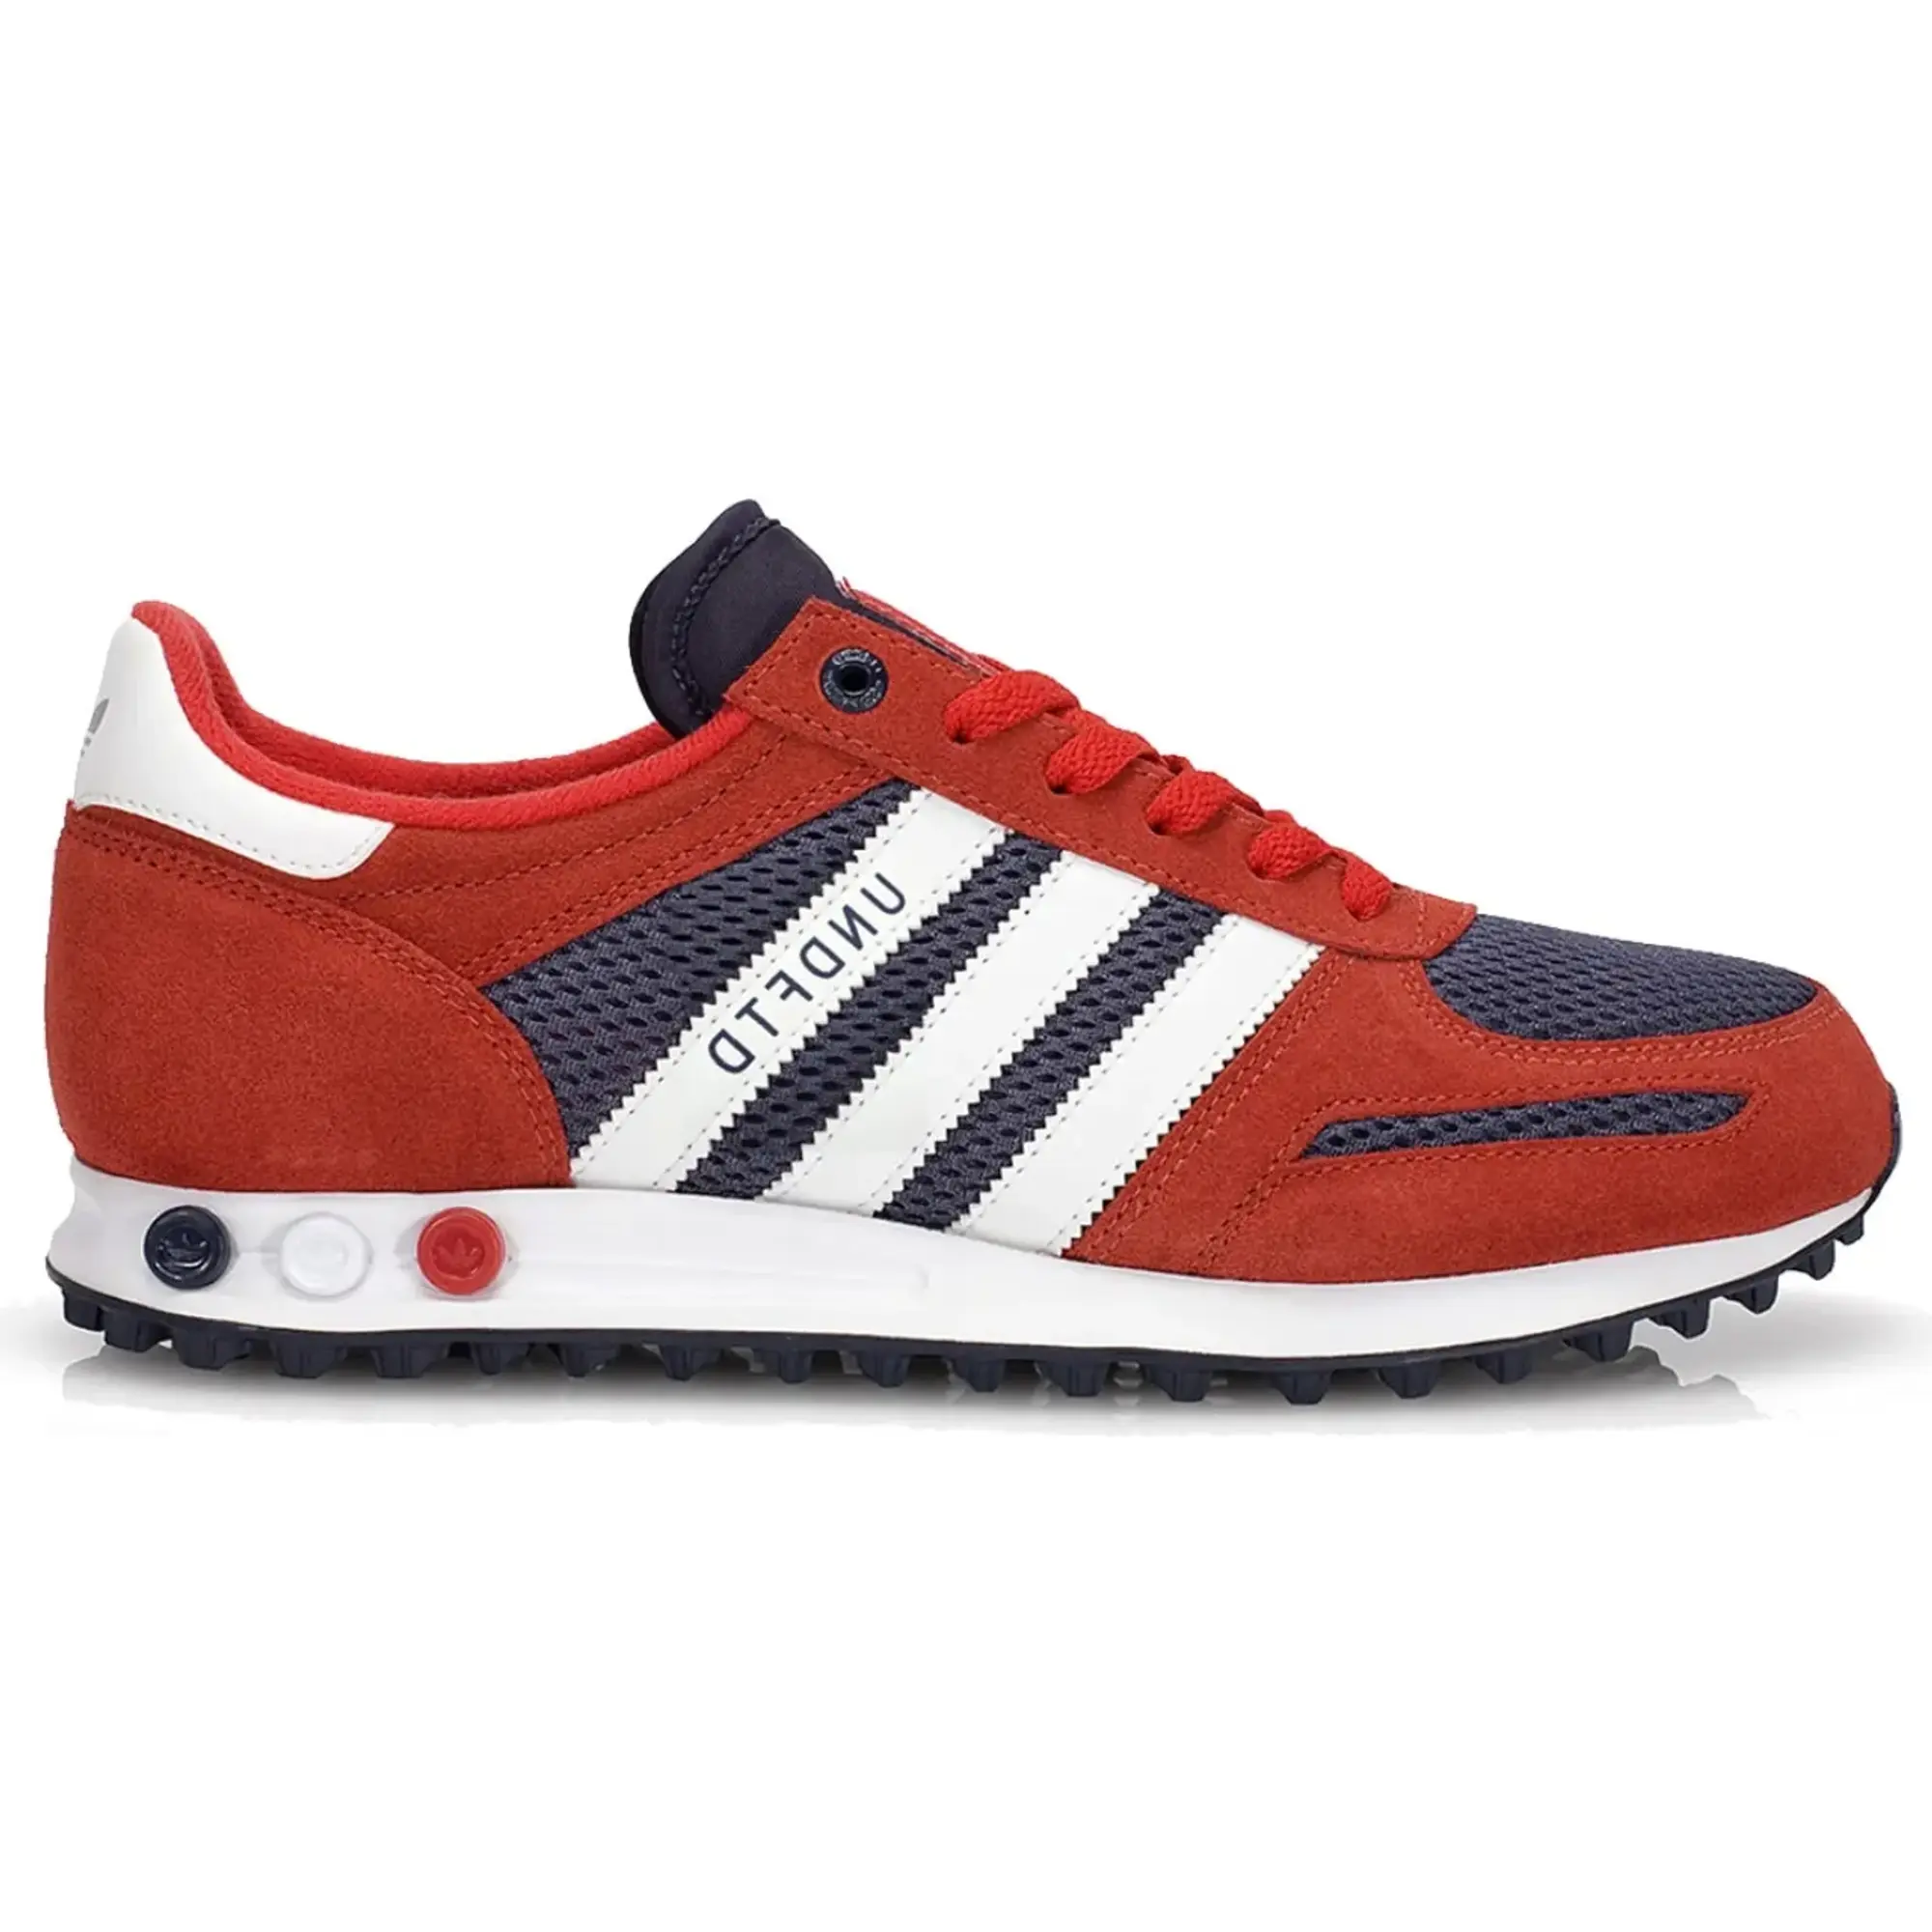 adidas Consortium x Undefeated LA Trainer Your City PackLight Scarlet